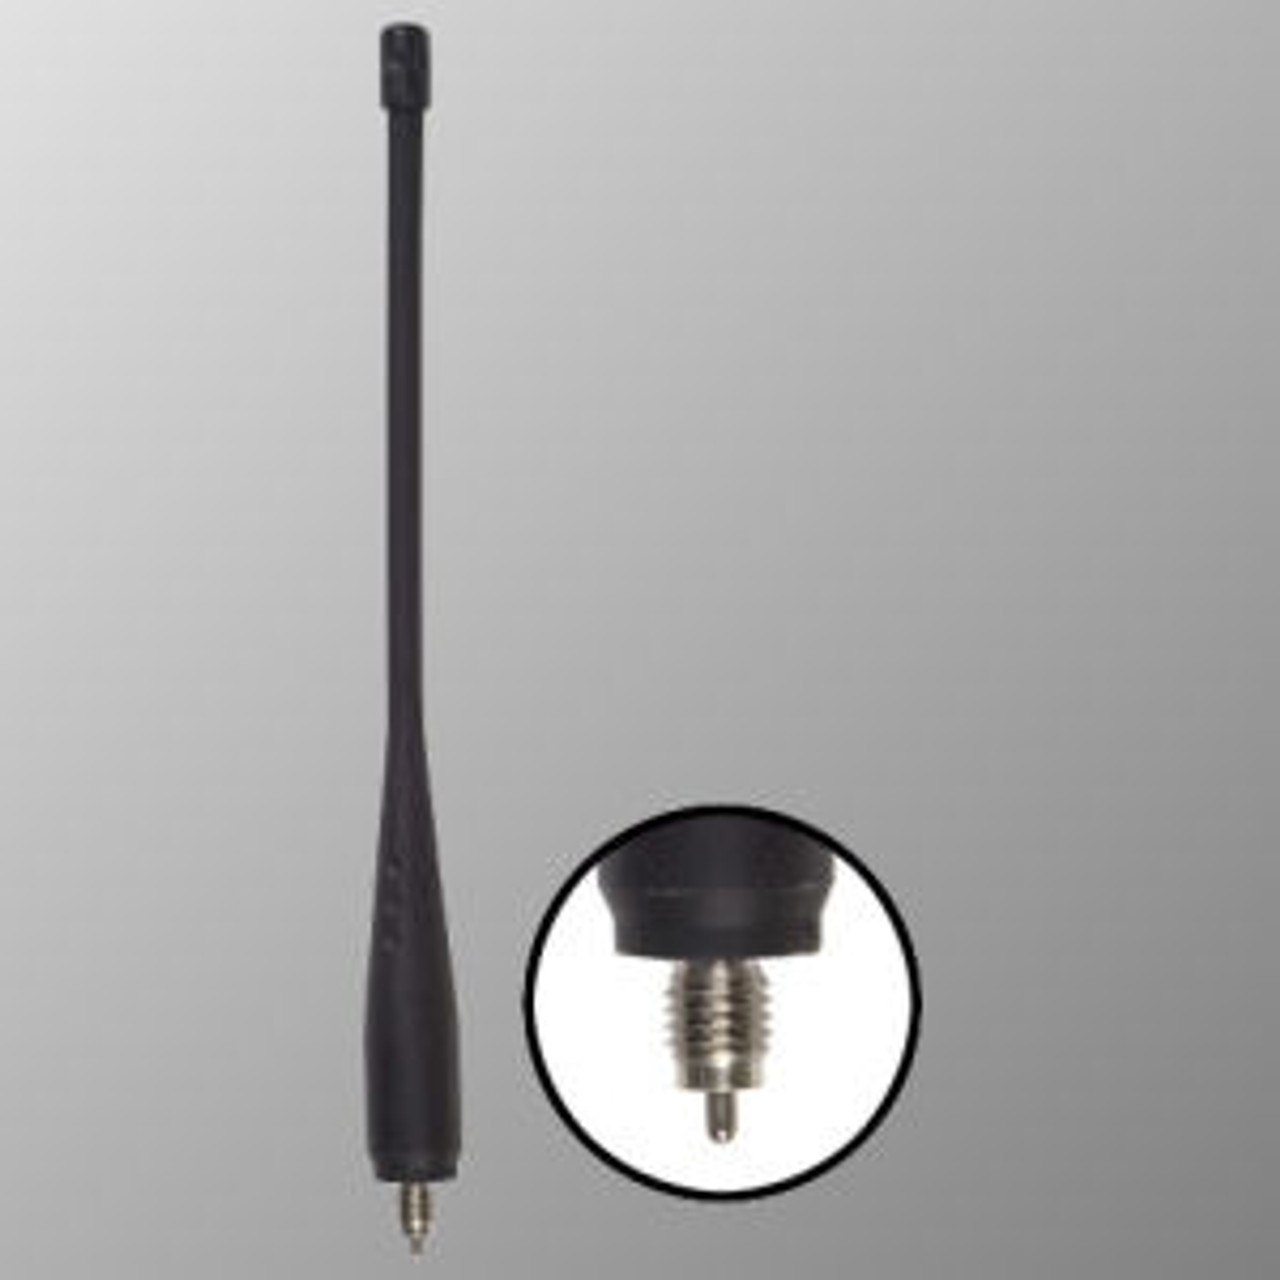 Replacement For M/A-Com HTNC5K Antenna - 6.5", 800 MHz, 800-866 MHz